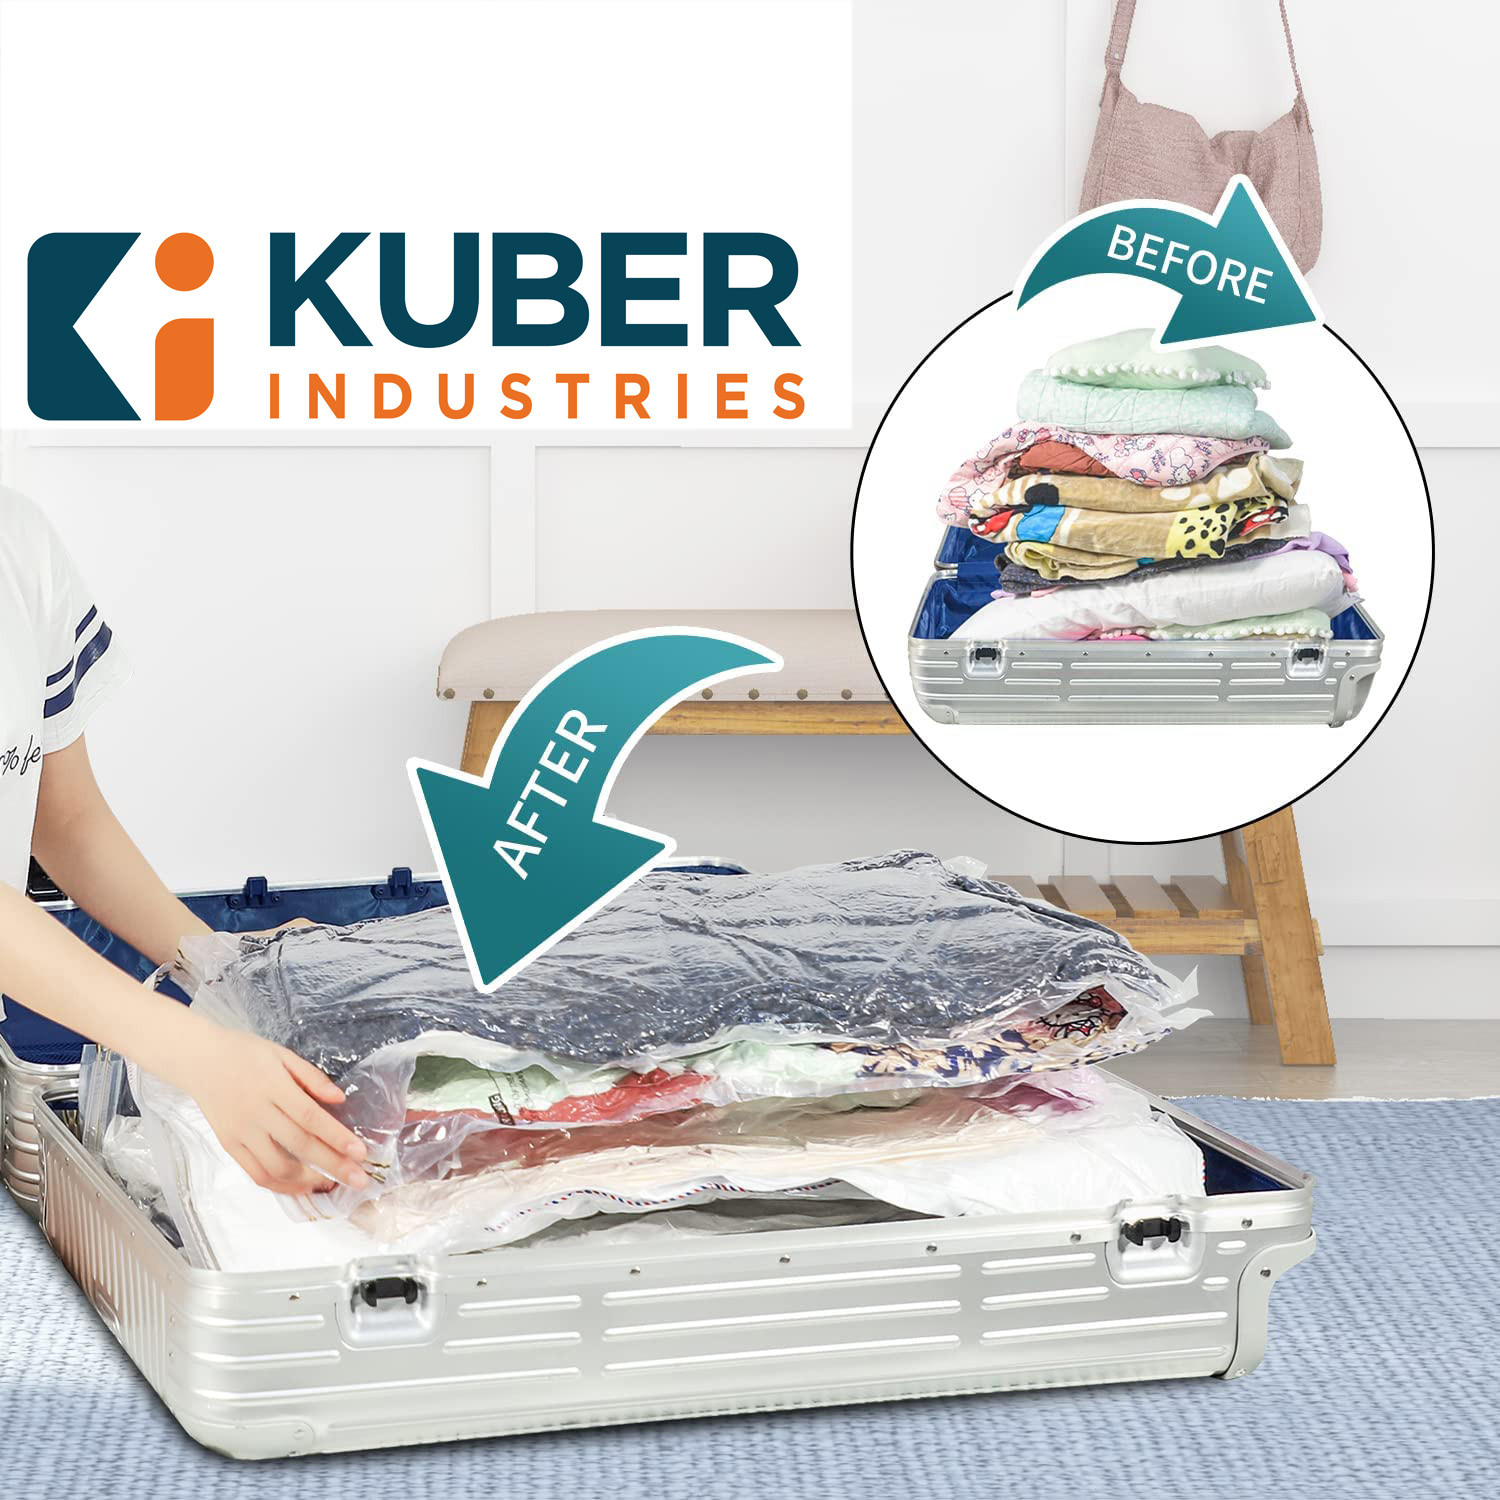 Kuber Industries Vacuum Storage Bags|Space Saver Bags|Travel Vacuum Storage Seal Bags for Comforters Blankets Clothes Pillows With Hand Pump,50x60 cm,(Transparent)